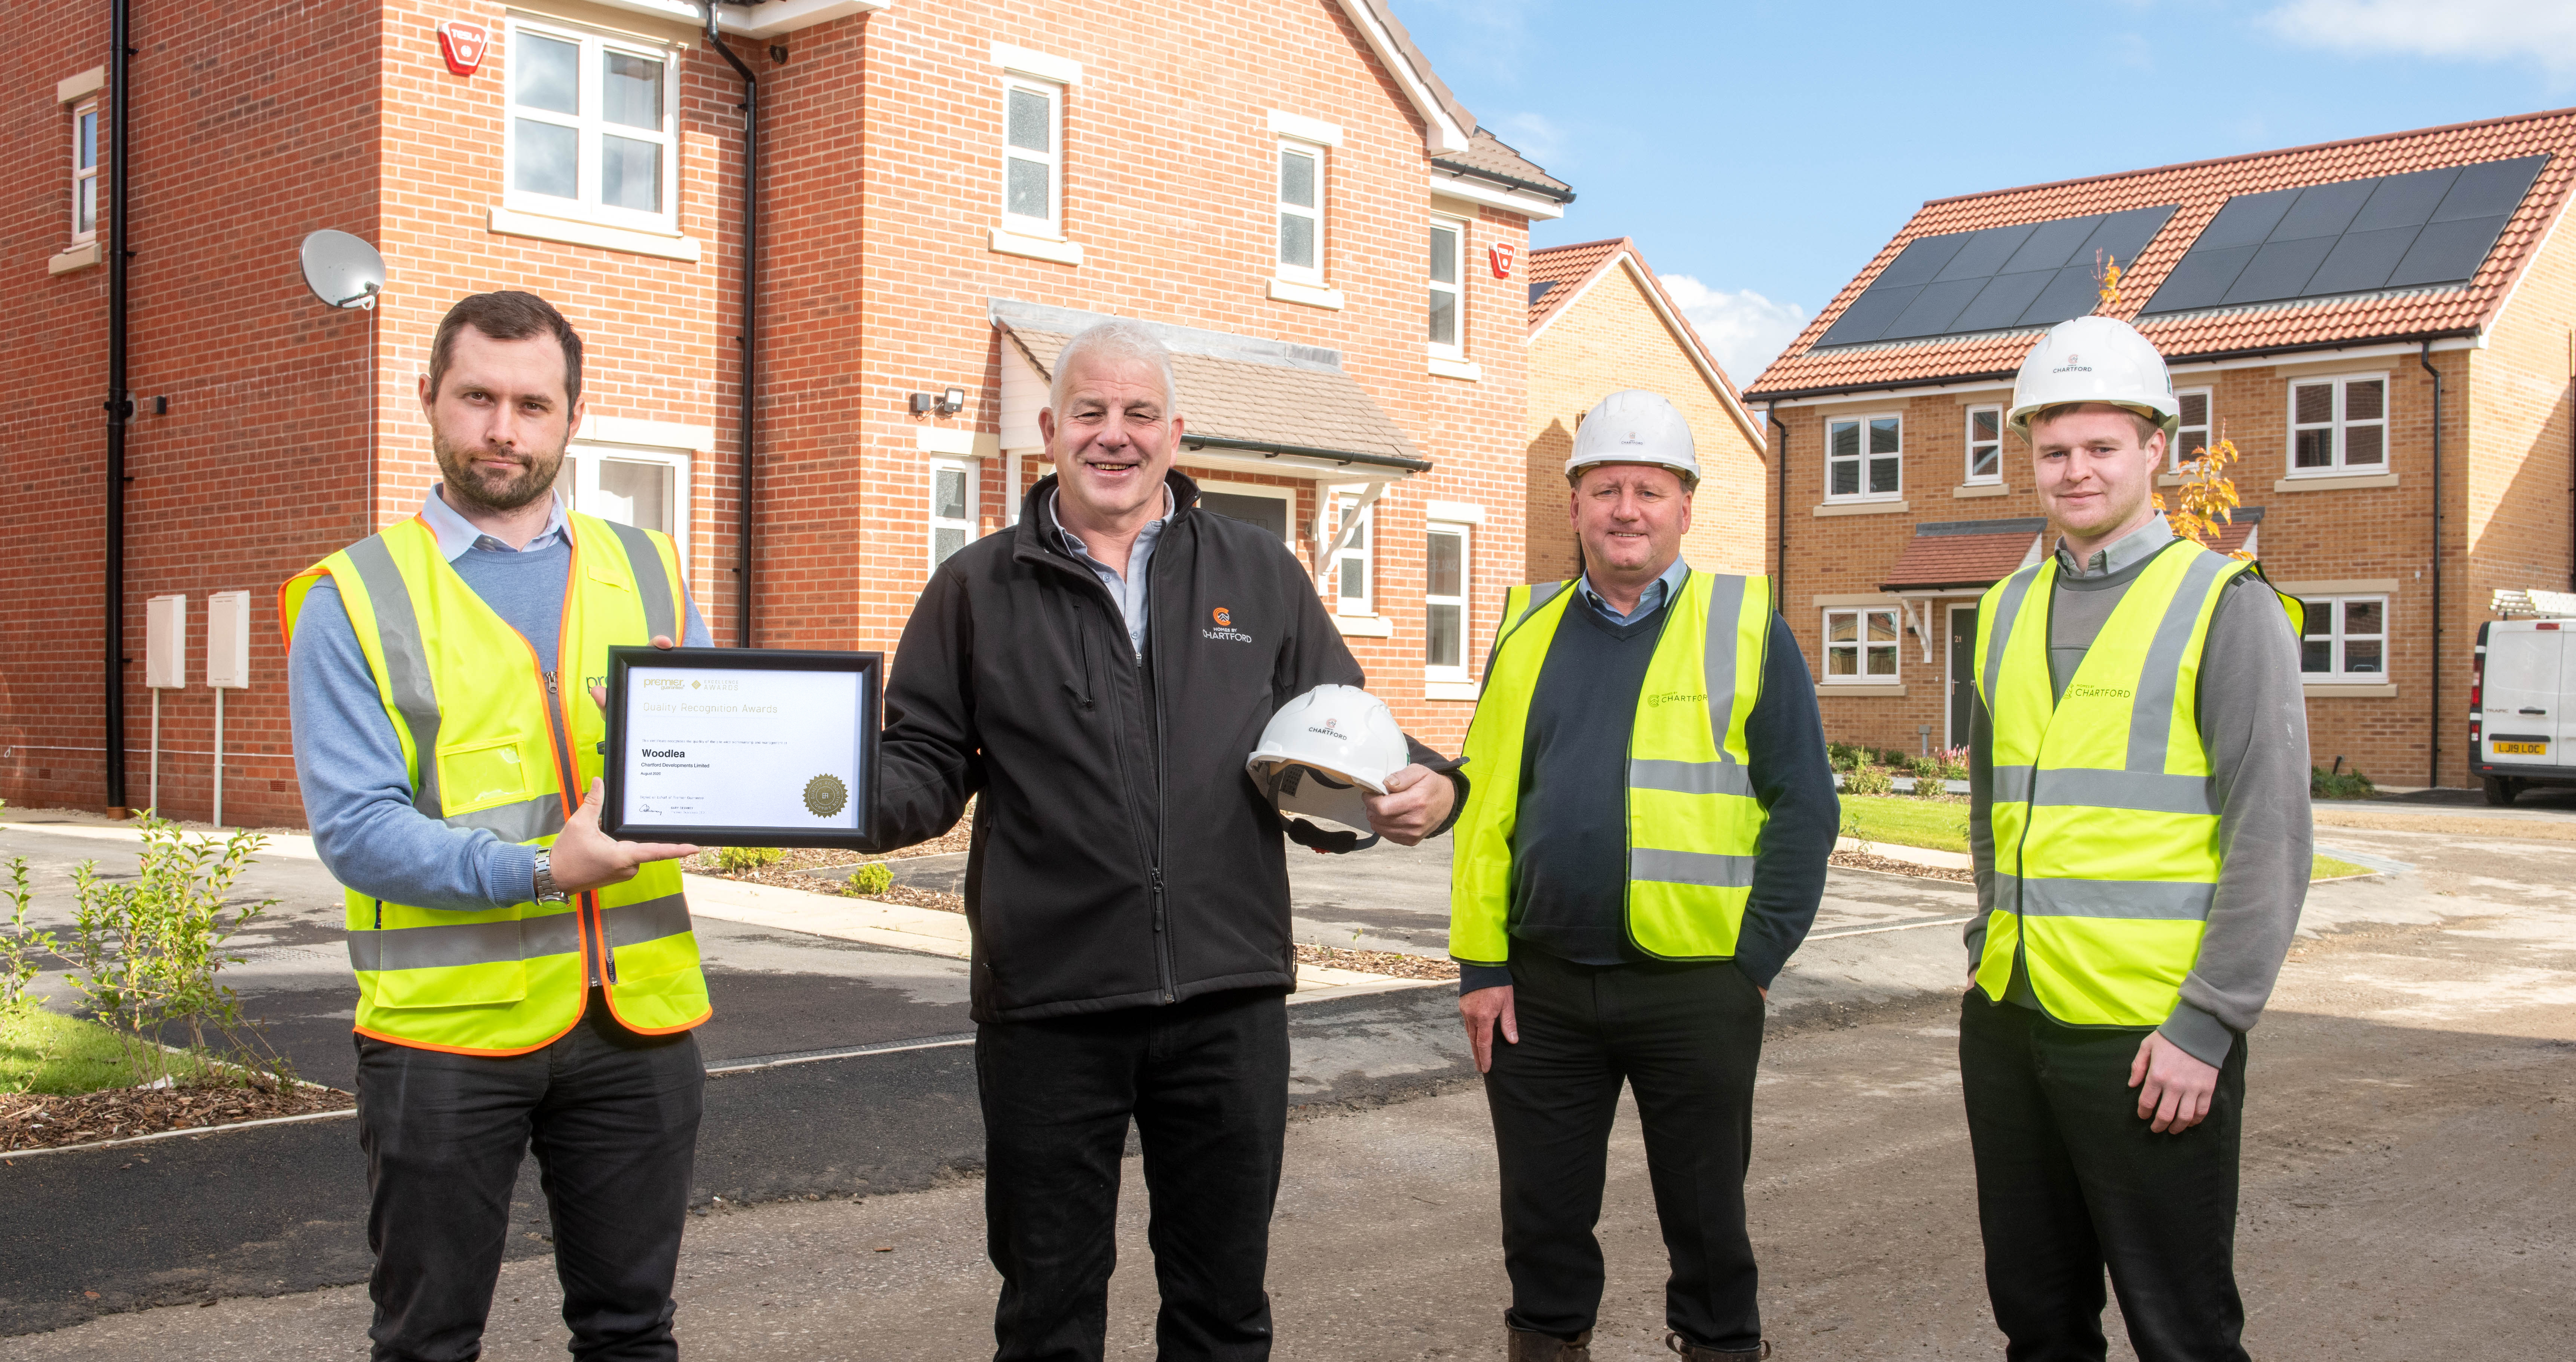 All smiles at our award winningWoodlea Development